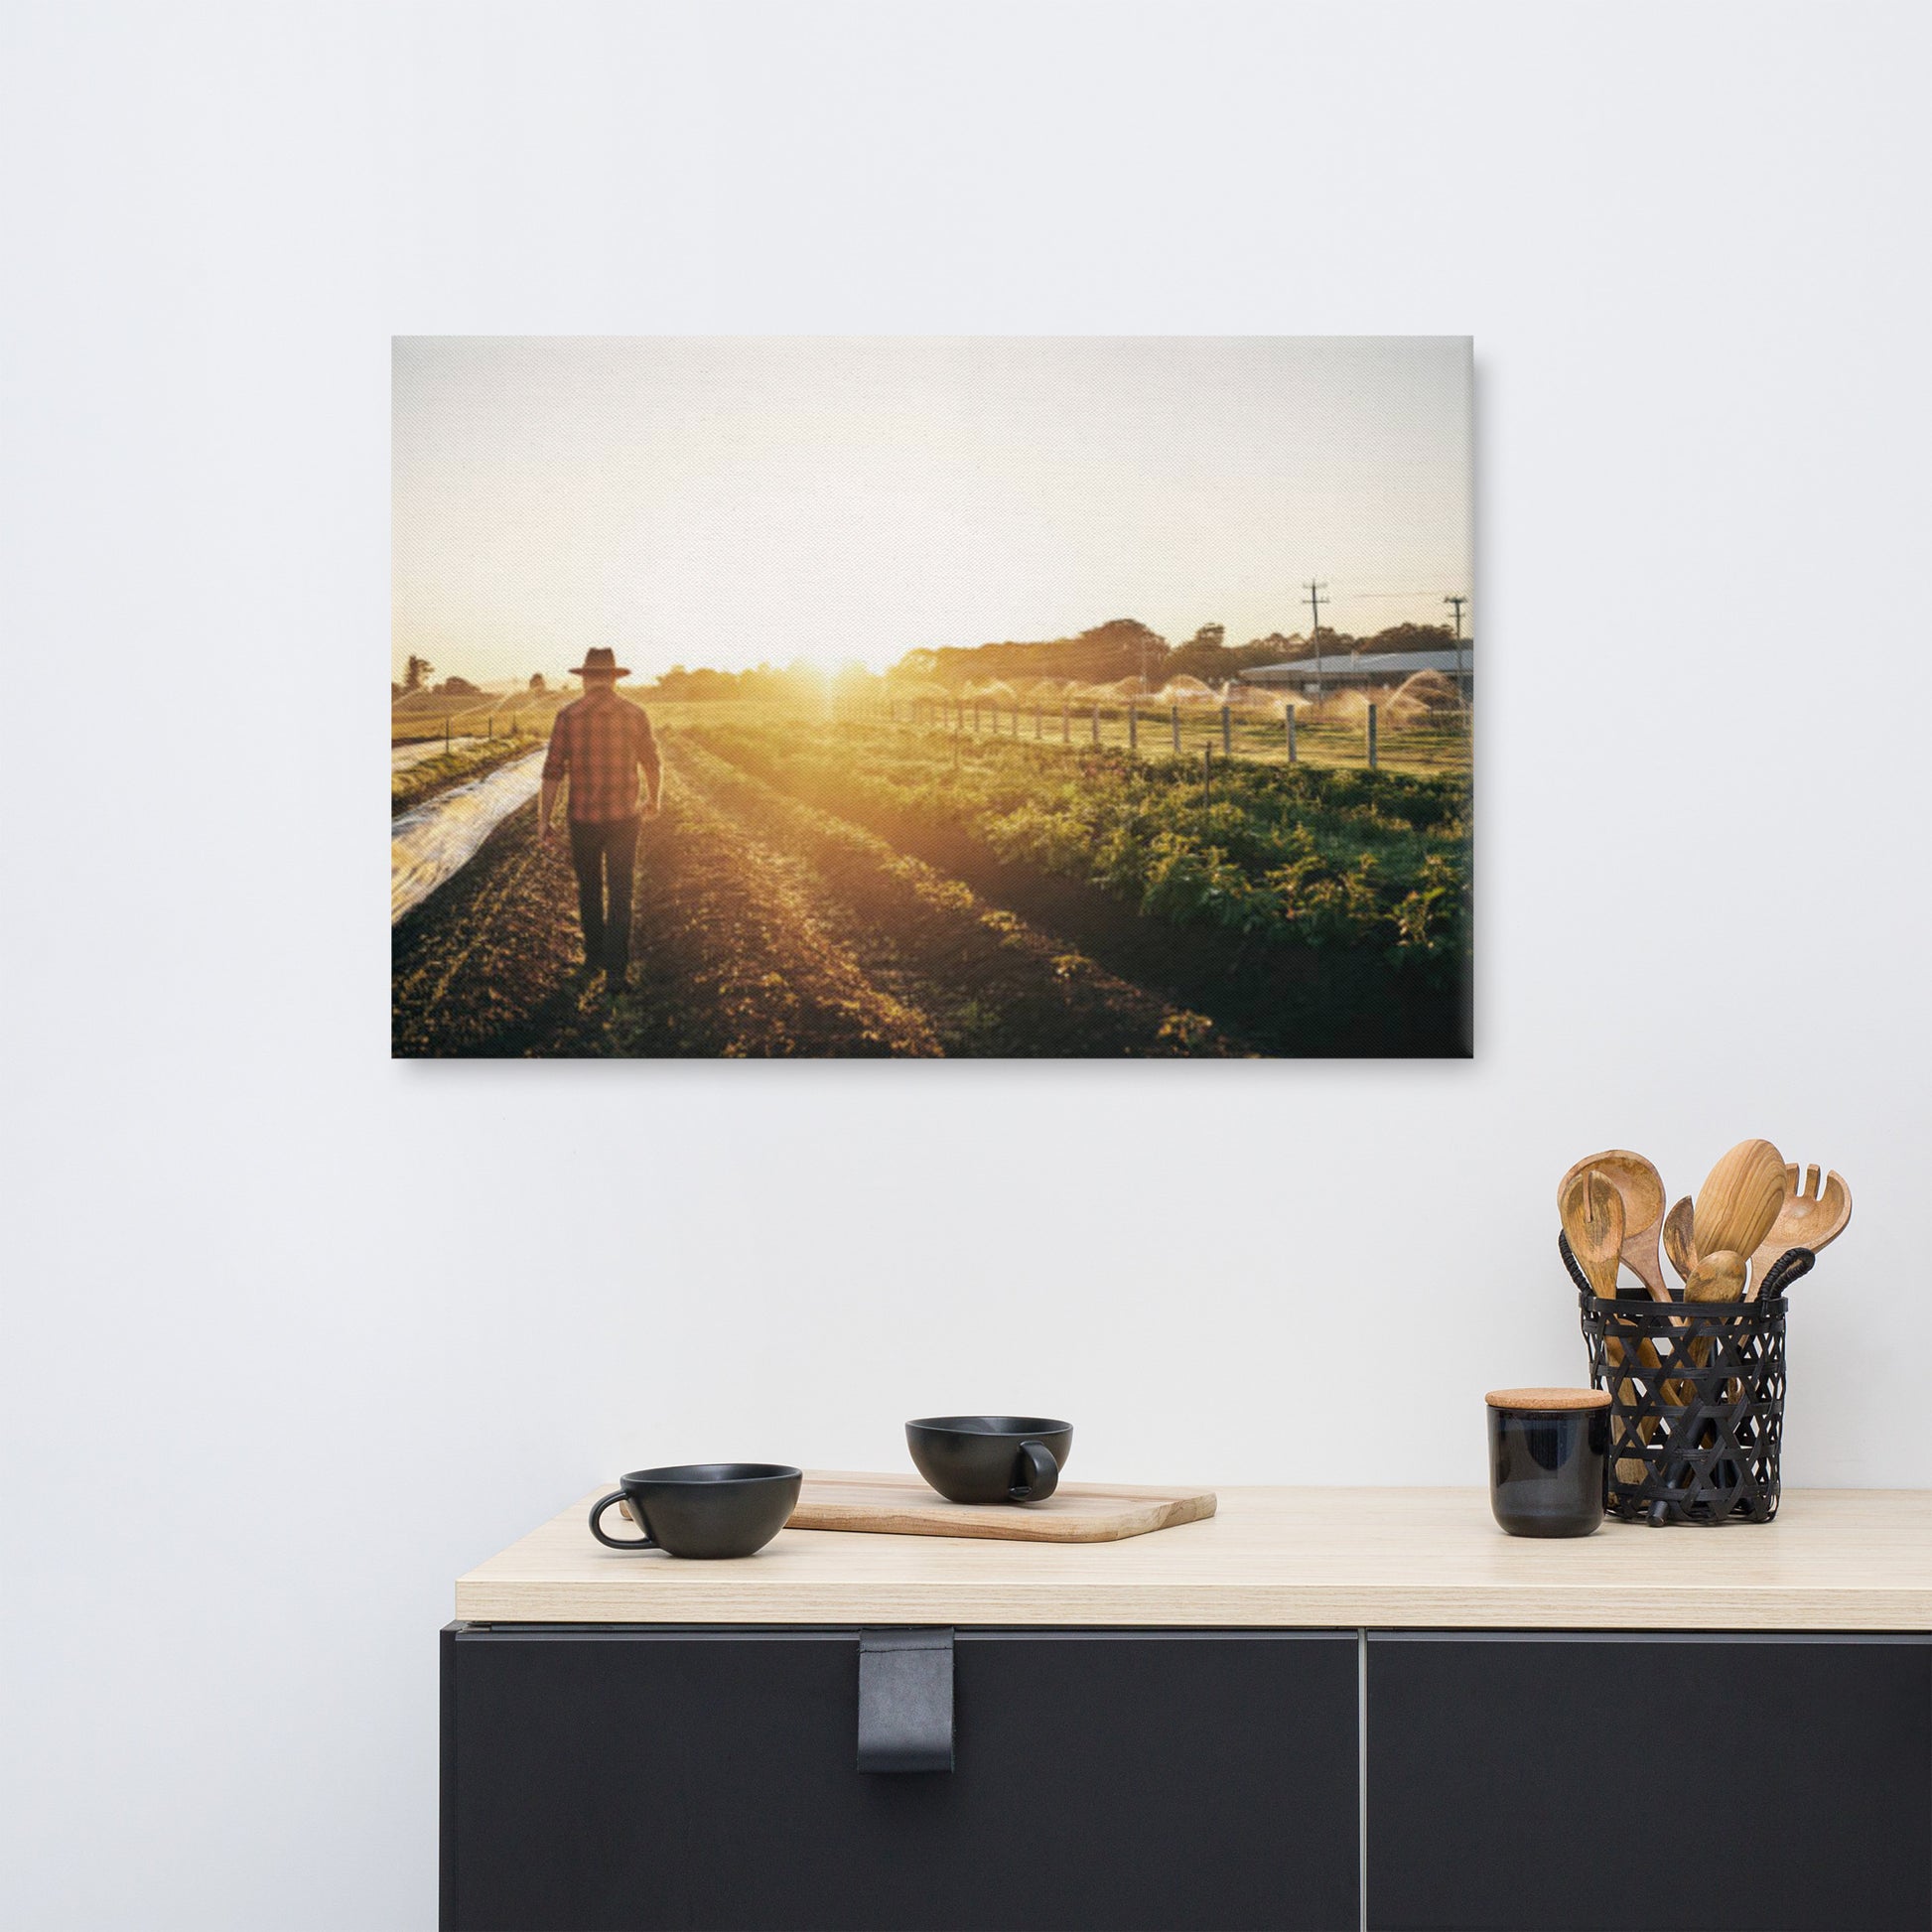 Hang Pictures Above Bed: Farm Life - Farmer in the Sunrise Rural / Country / Farmhouse Style Landscape Photograph Canvas Wall Art Print